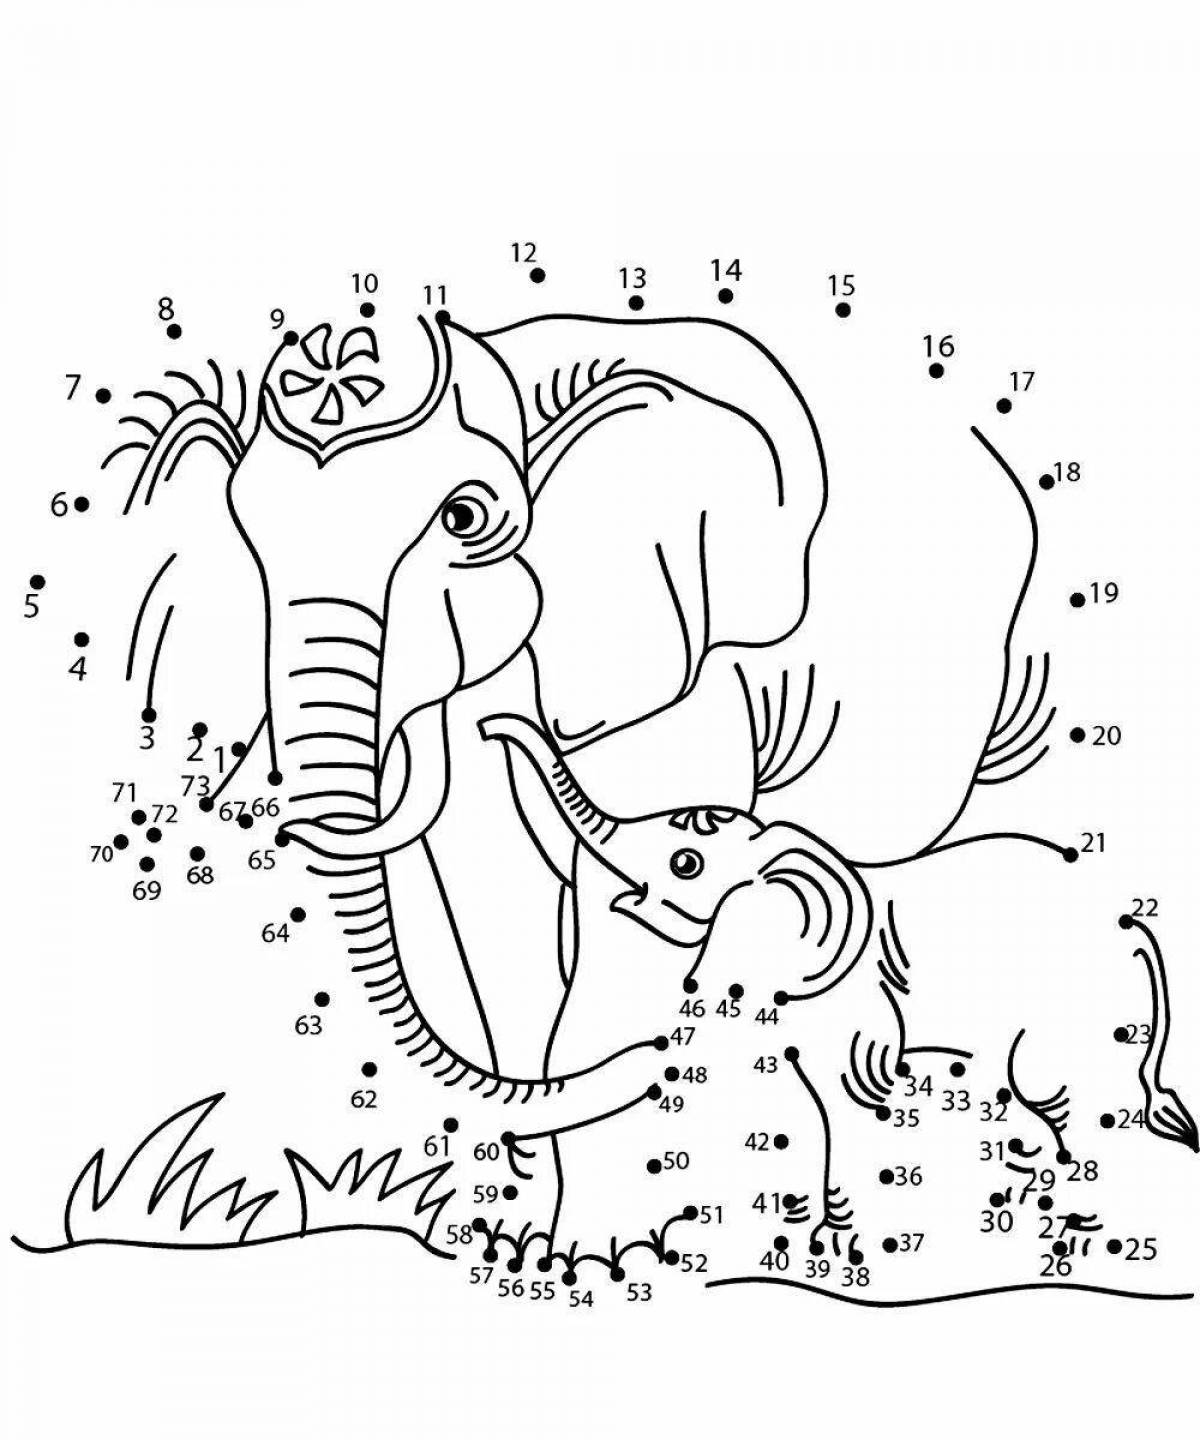 Perfect elephant coloring by numbers